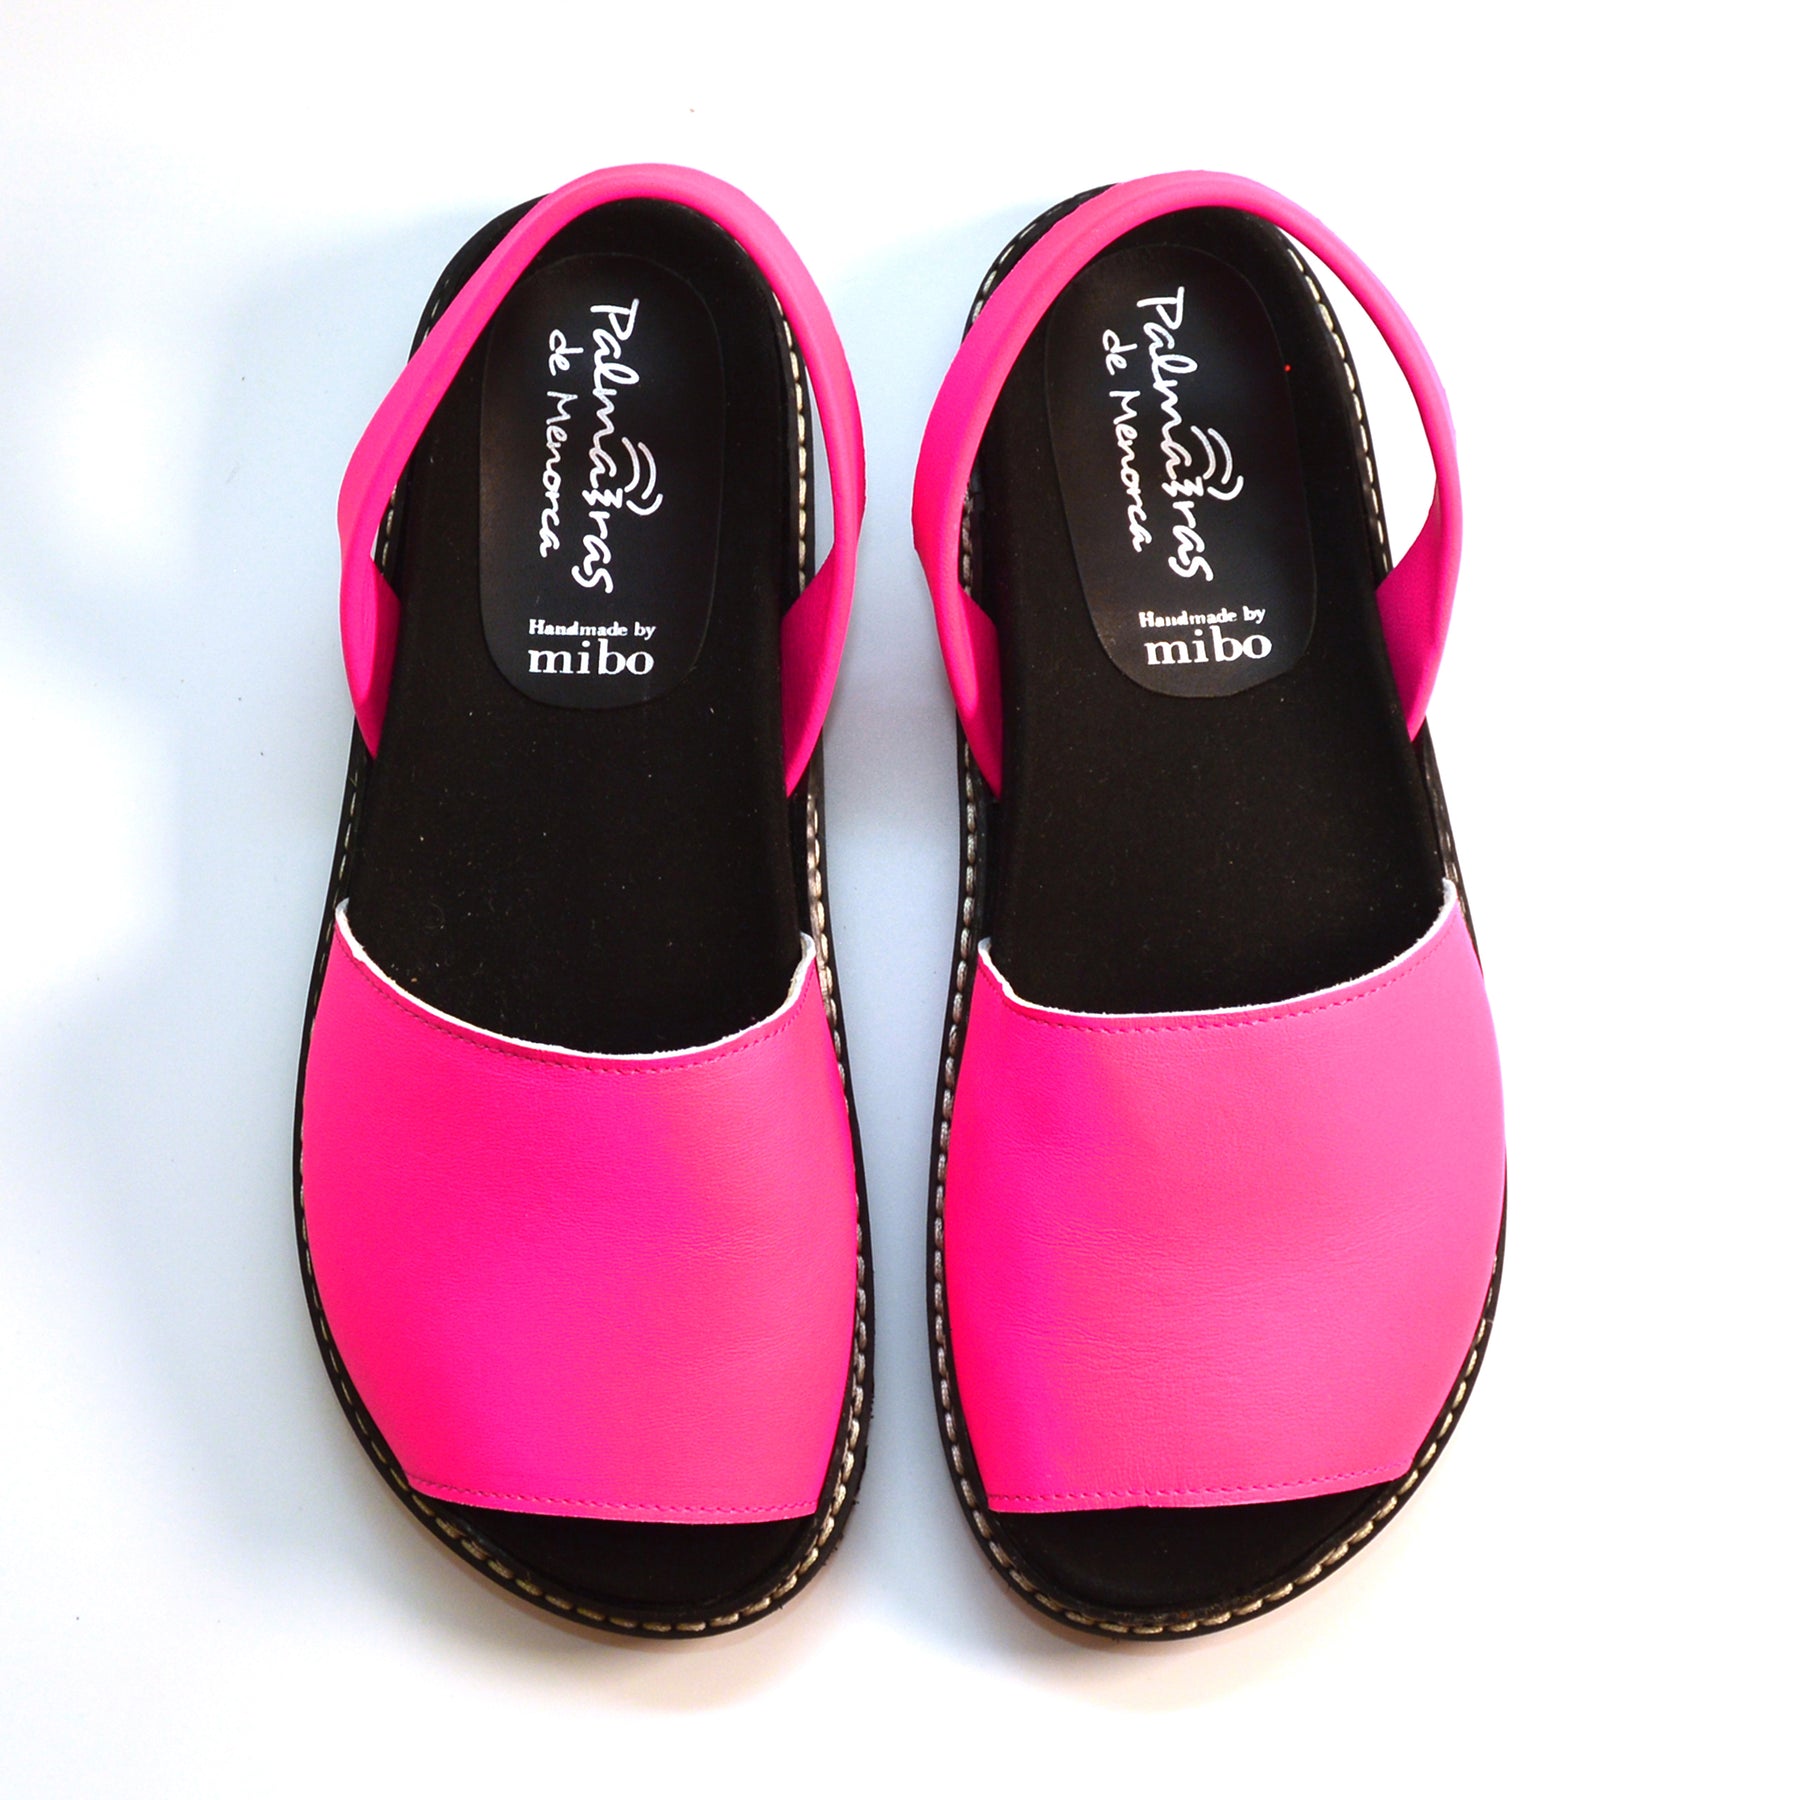 neon pink leather slingback avarcas with arch support menorcan sandals